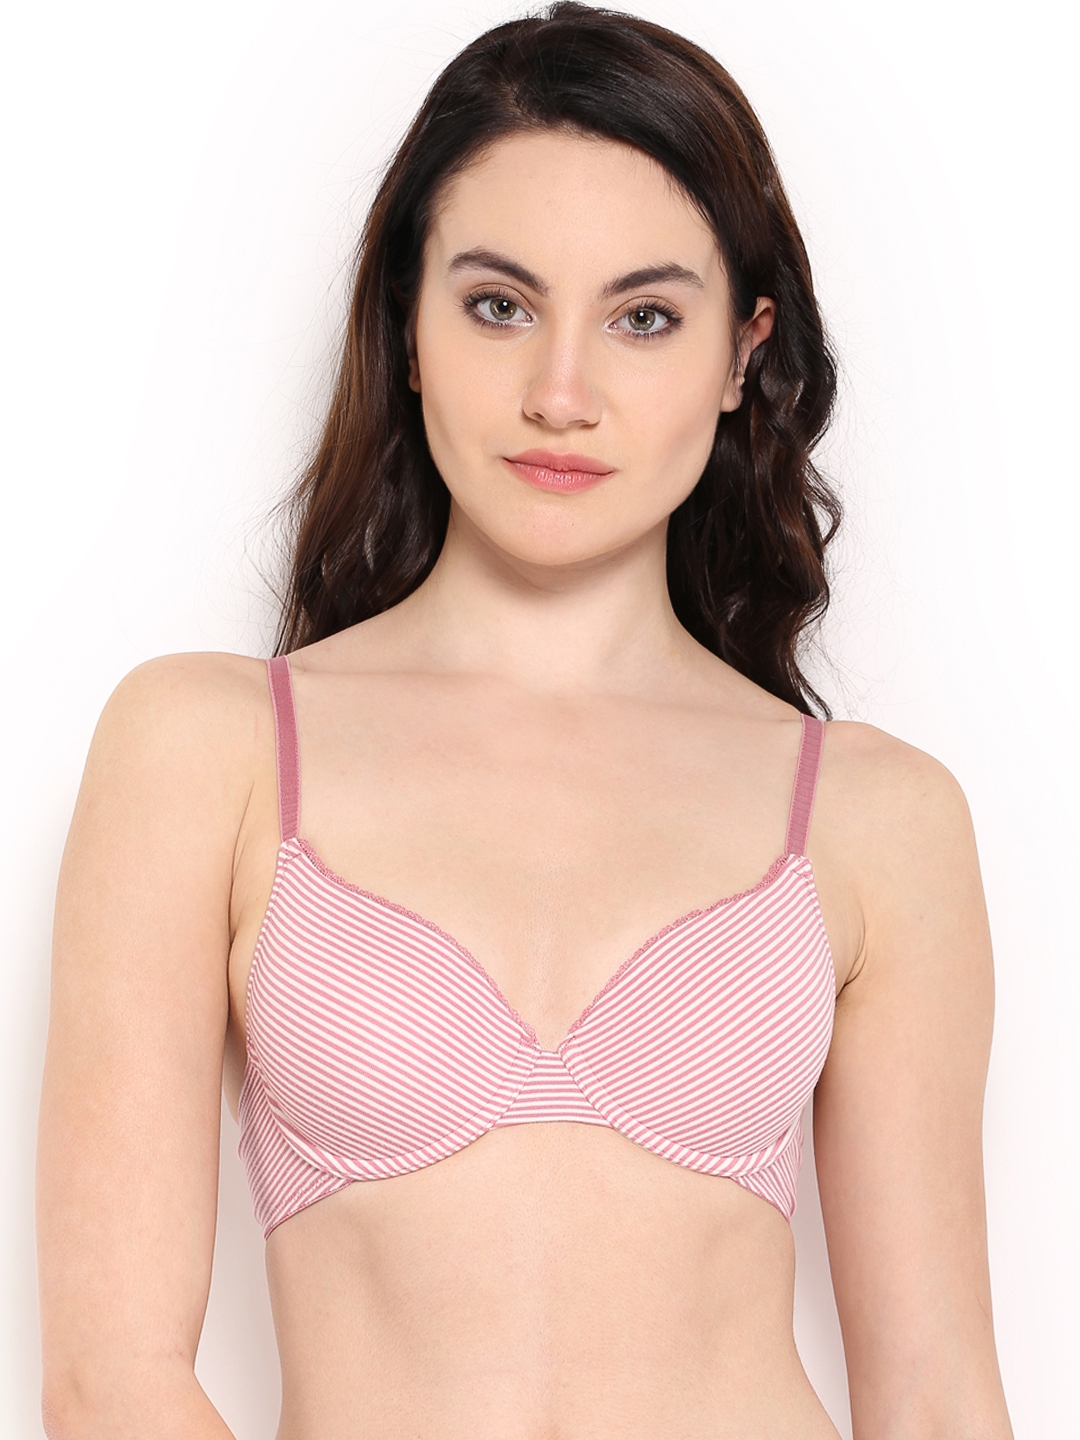 Buy Amante Pink Striped Full Coverage T Shirt Bra BCCC01 - Bra for Women  330192